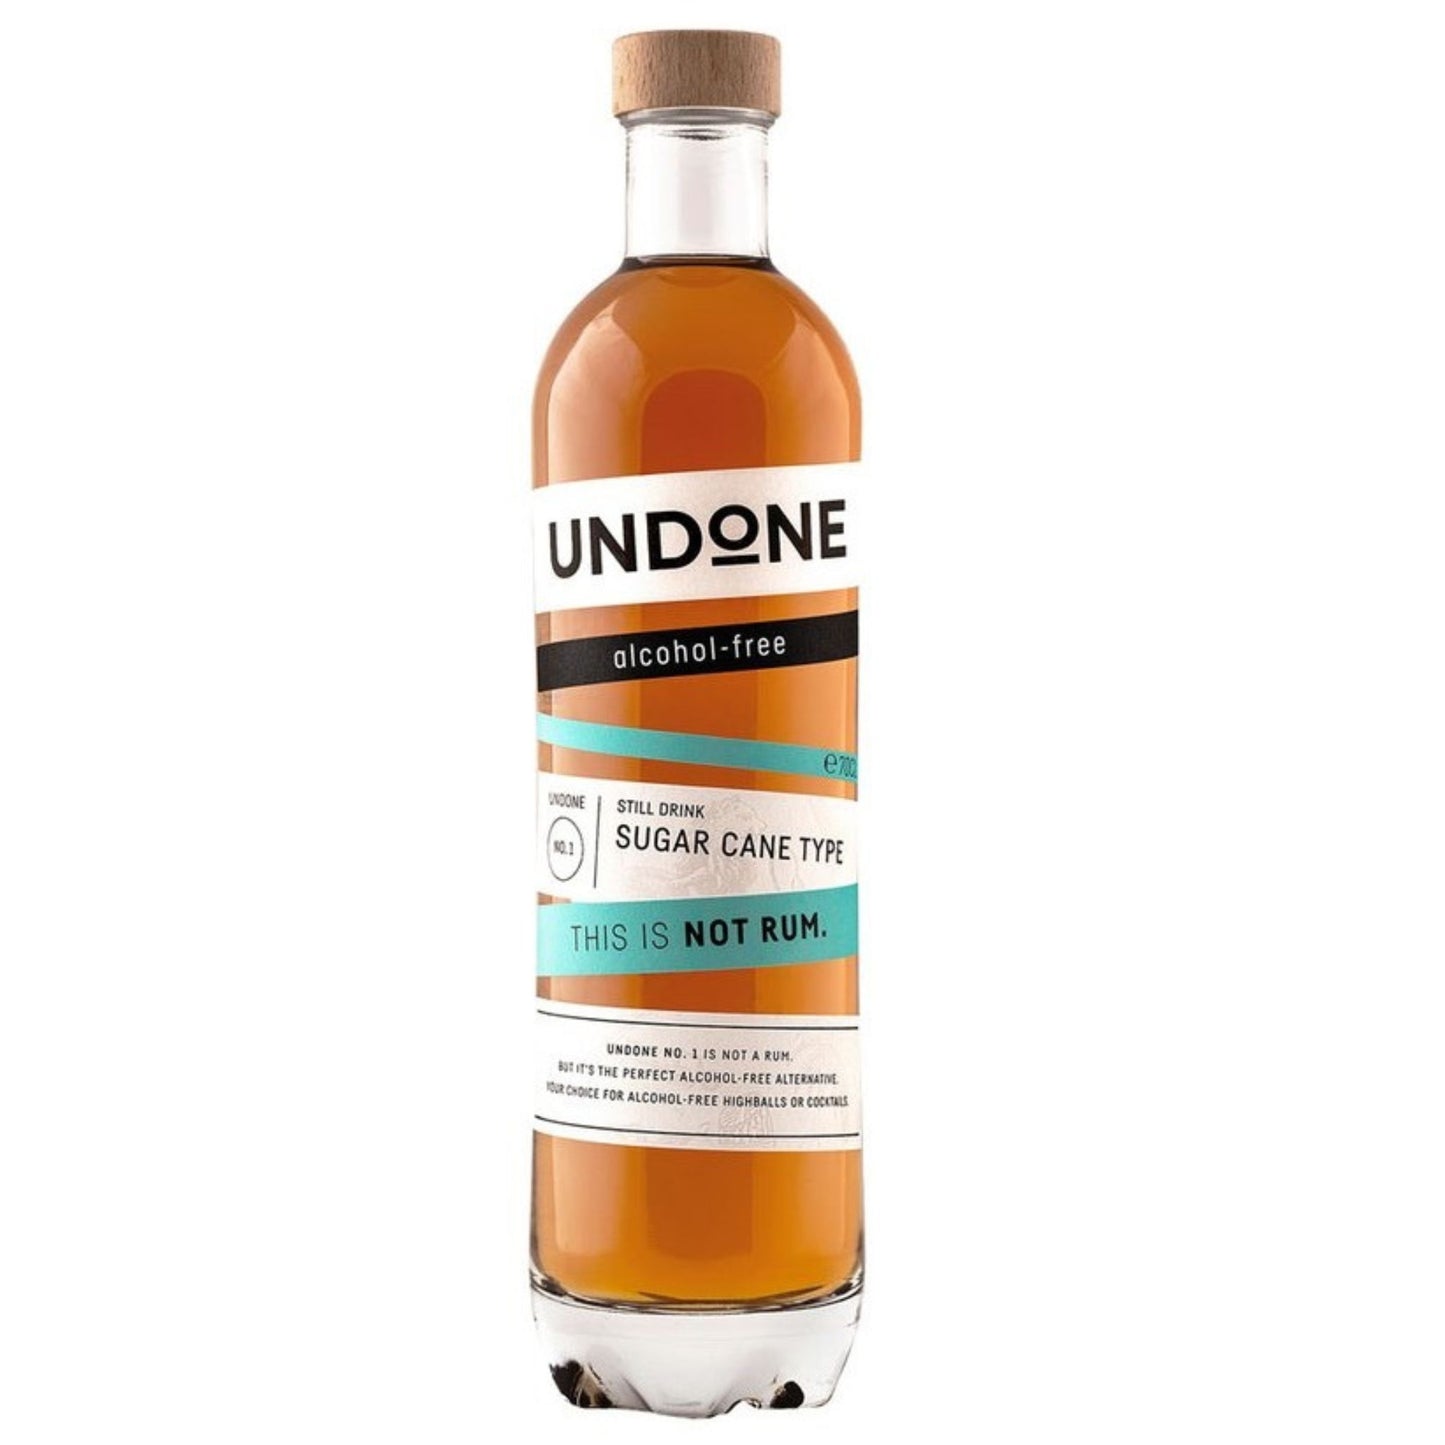 UNDONE Not Rum No. 1 Sugar Cane Type non-alcoholic rum is available at Knyota Drinks in Ottawa.